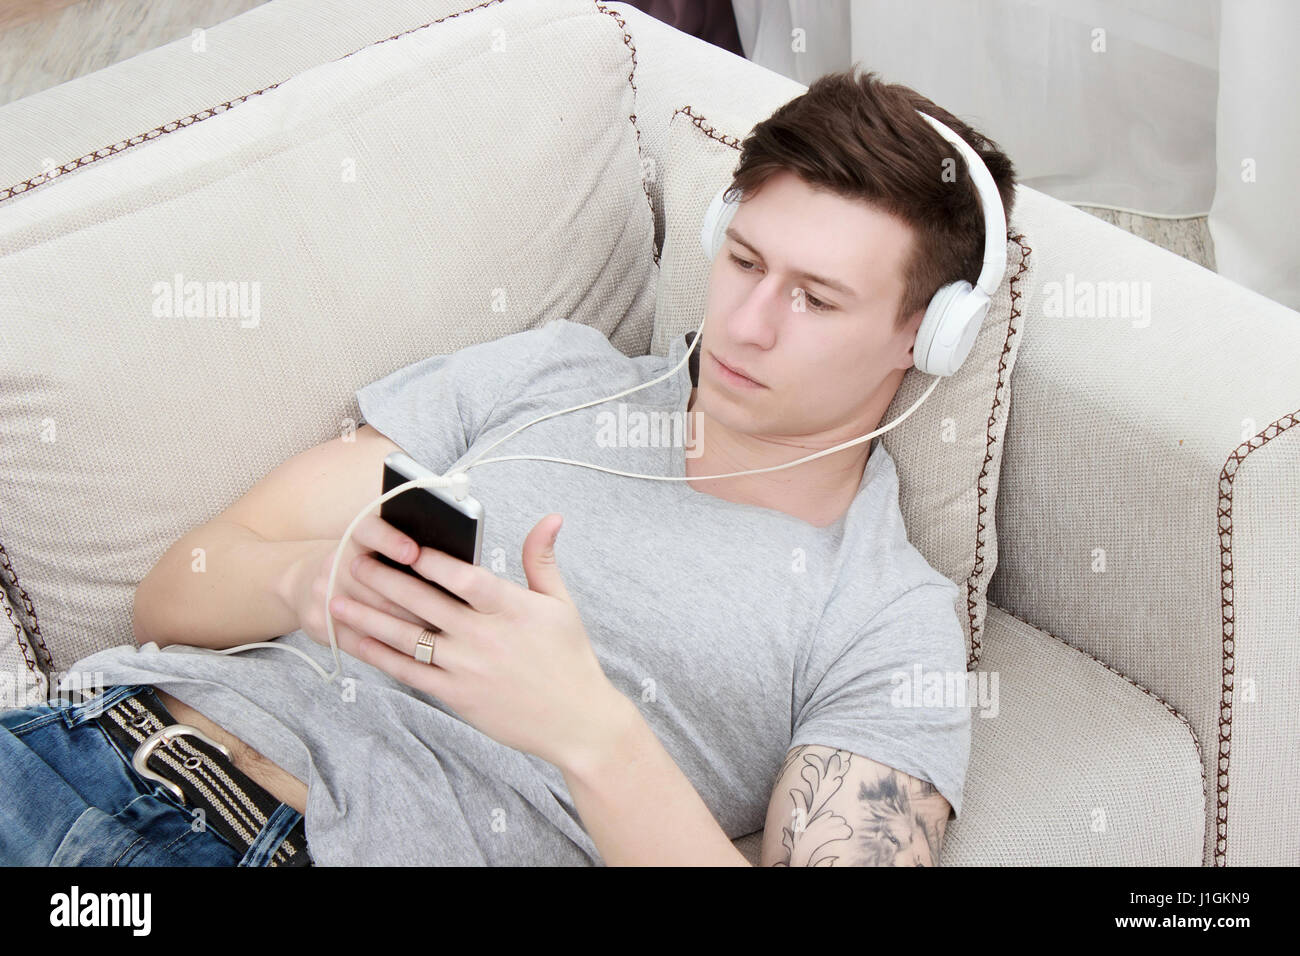 man listening to music with headphones and smartphone while relaxing on sofa Stock Photo